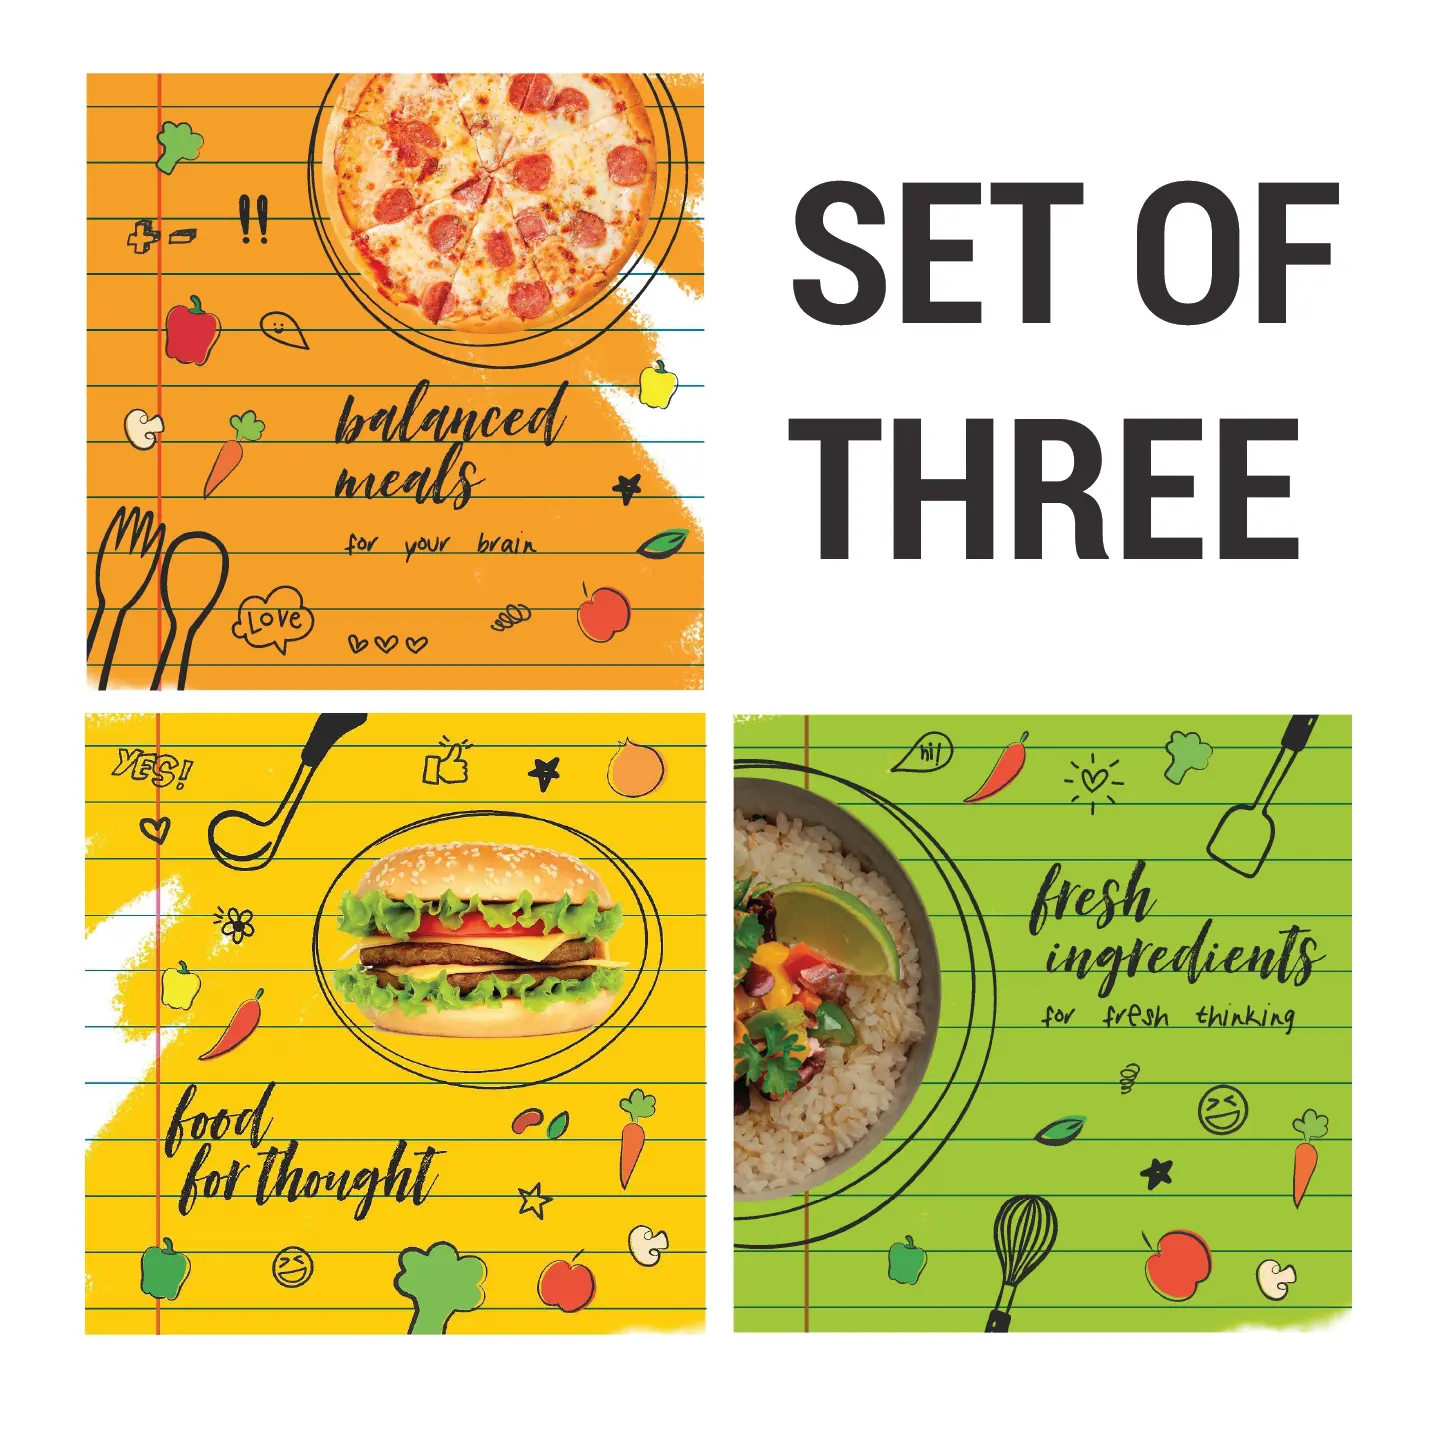 Art Poster ( Set of 3 ) “Food For Thought” “Balanced Meals” “Fresh Ingriedients”